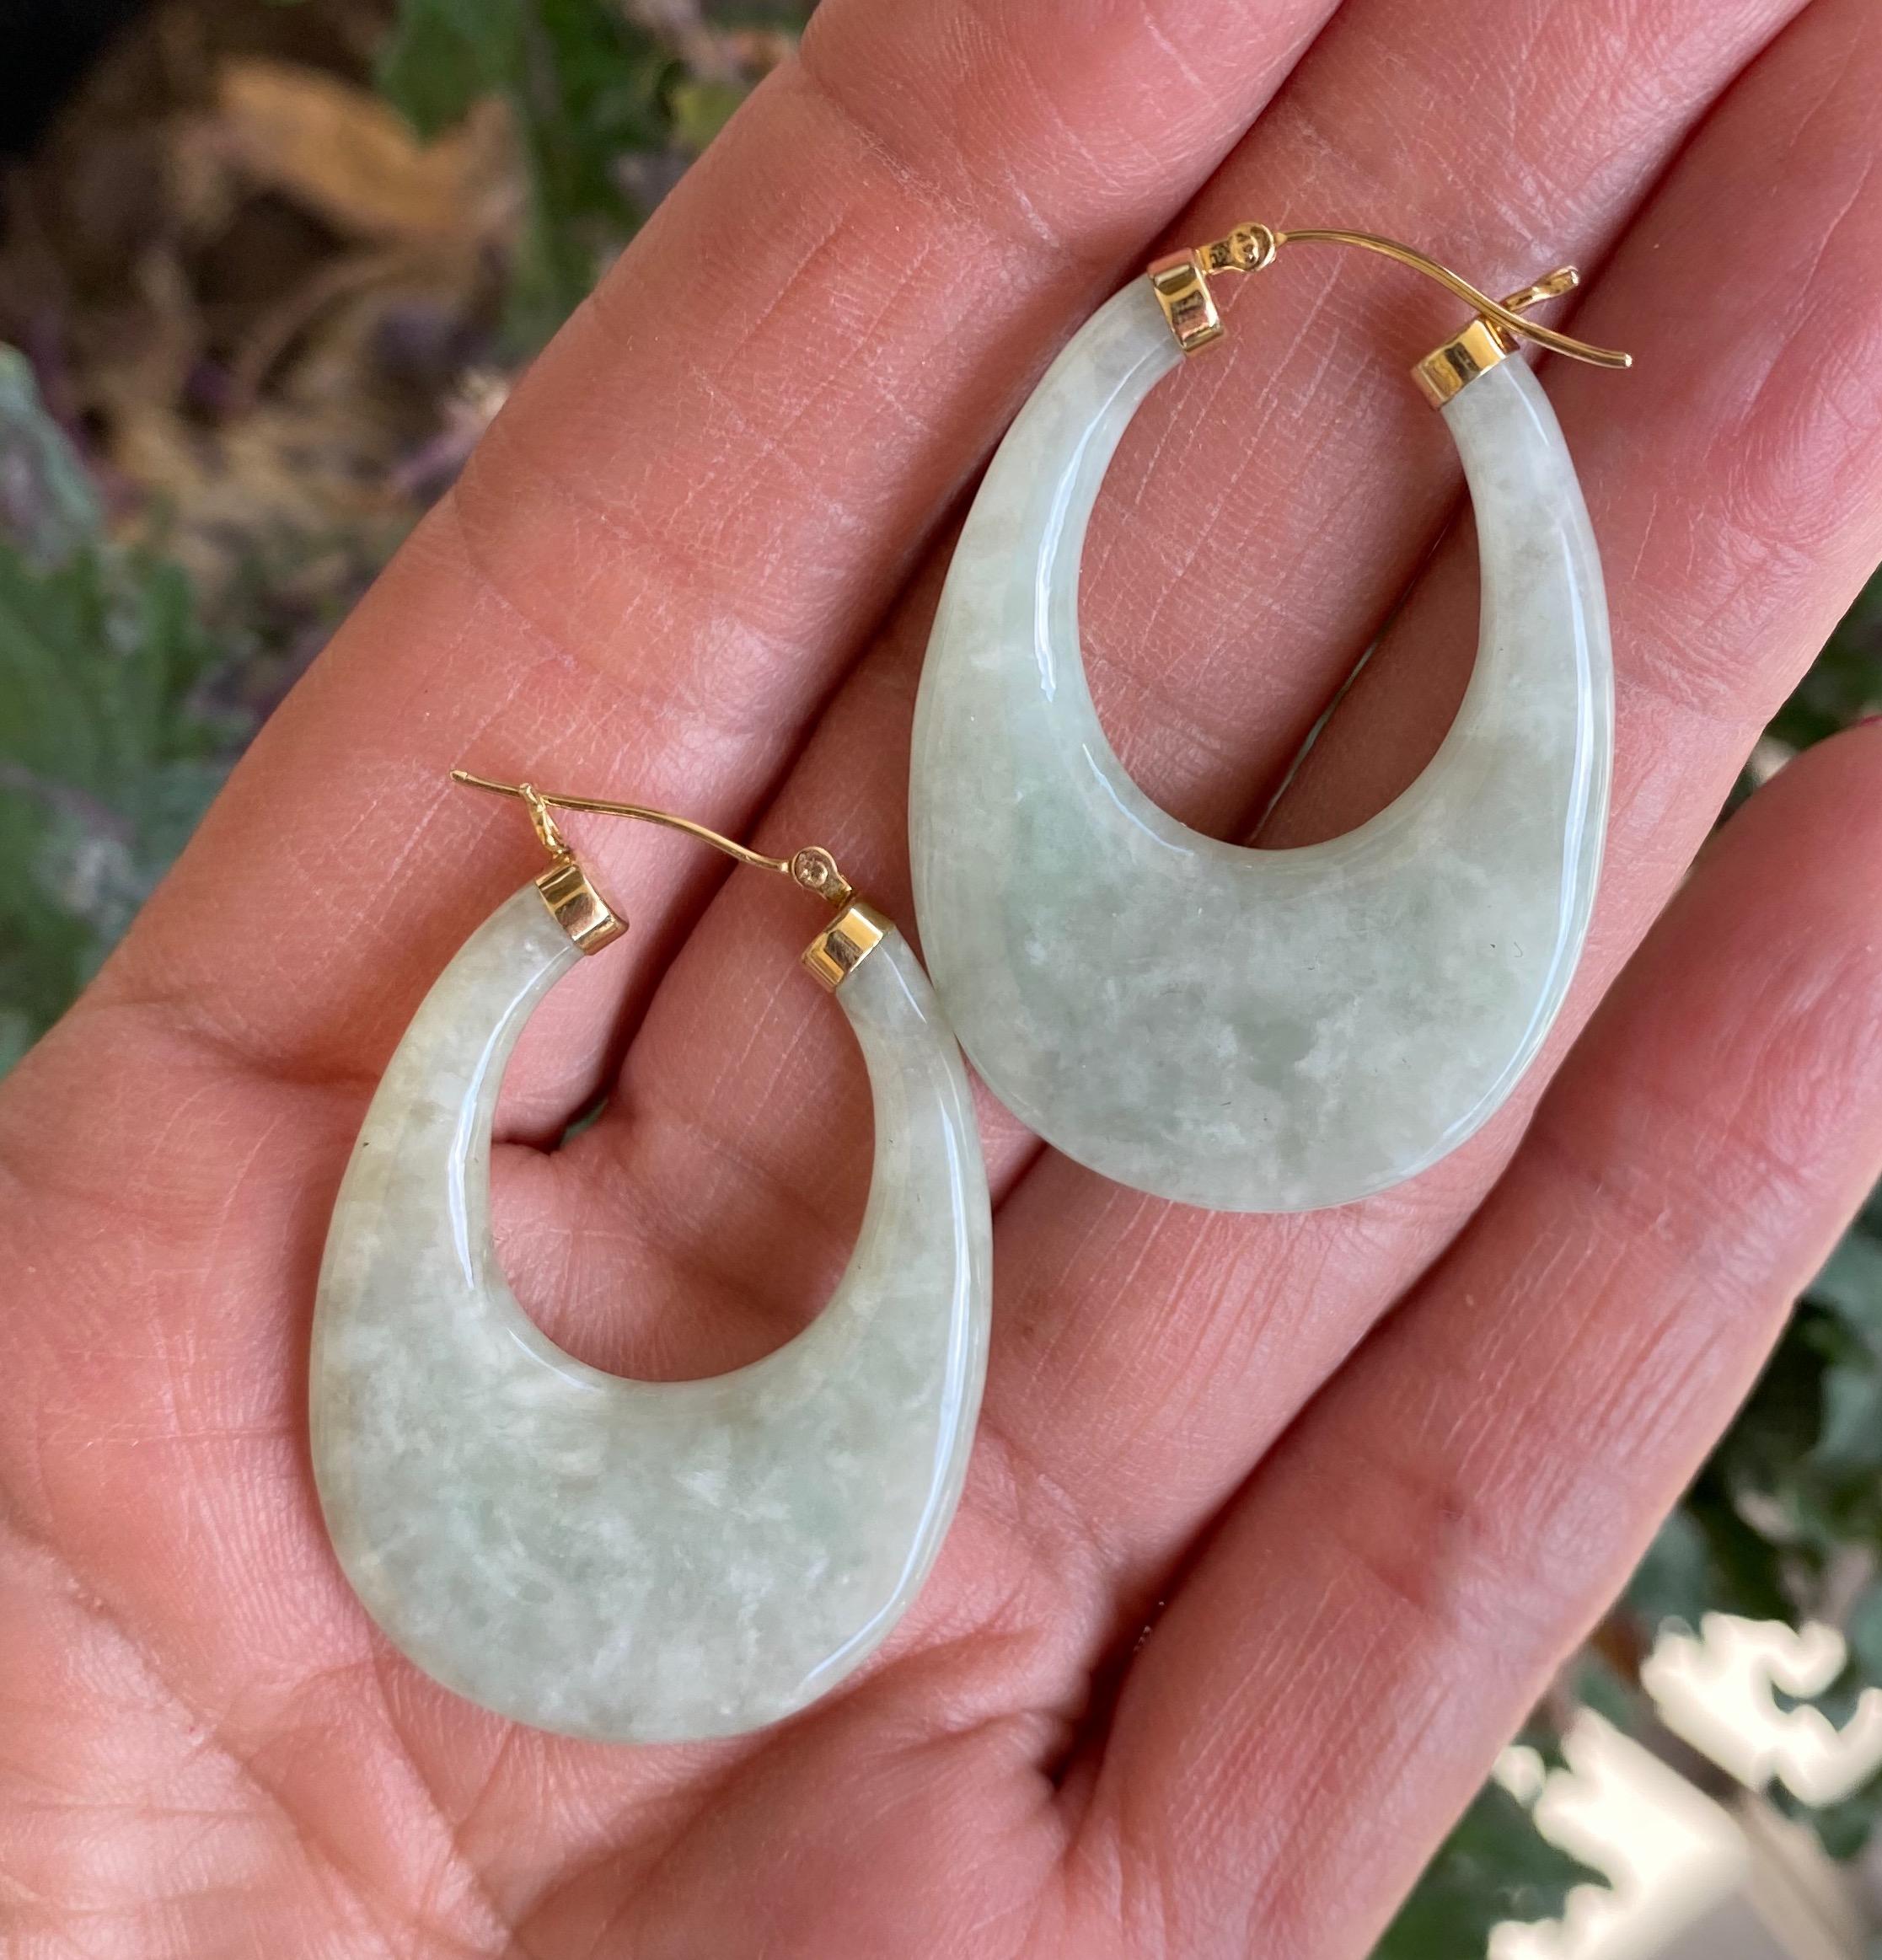 Green Jade Oval Shaped 14 Karat Gold Earrings
Set of convex shaped, oval-hanging earrings 1-1/2 inches in length by 1-1/25 inches wide.  
These earrings are granny-green apple colored and very pretty with their yellow gold, hinge style and snap-down